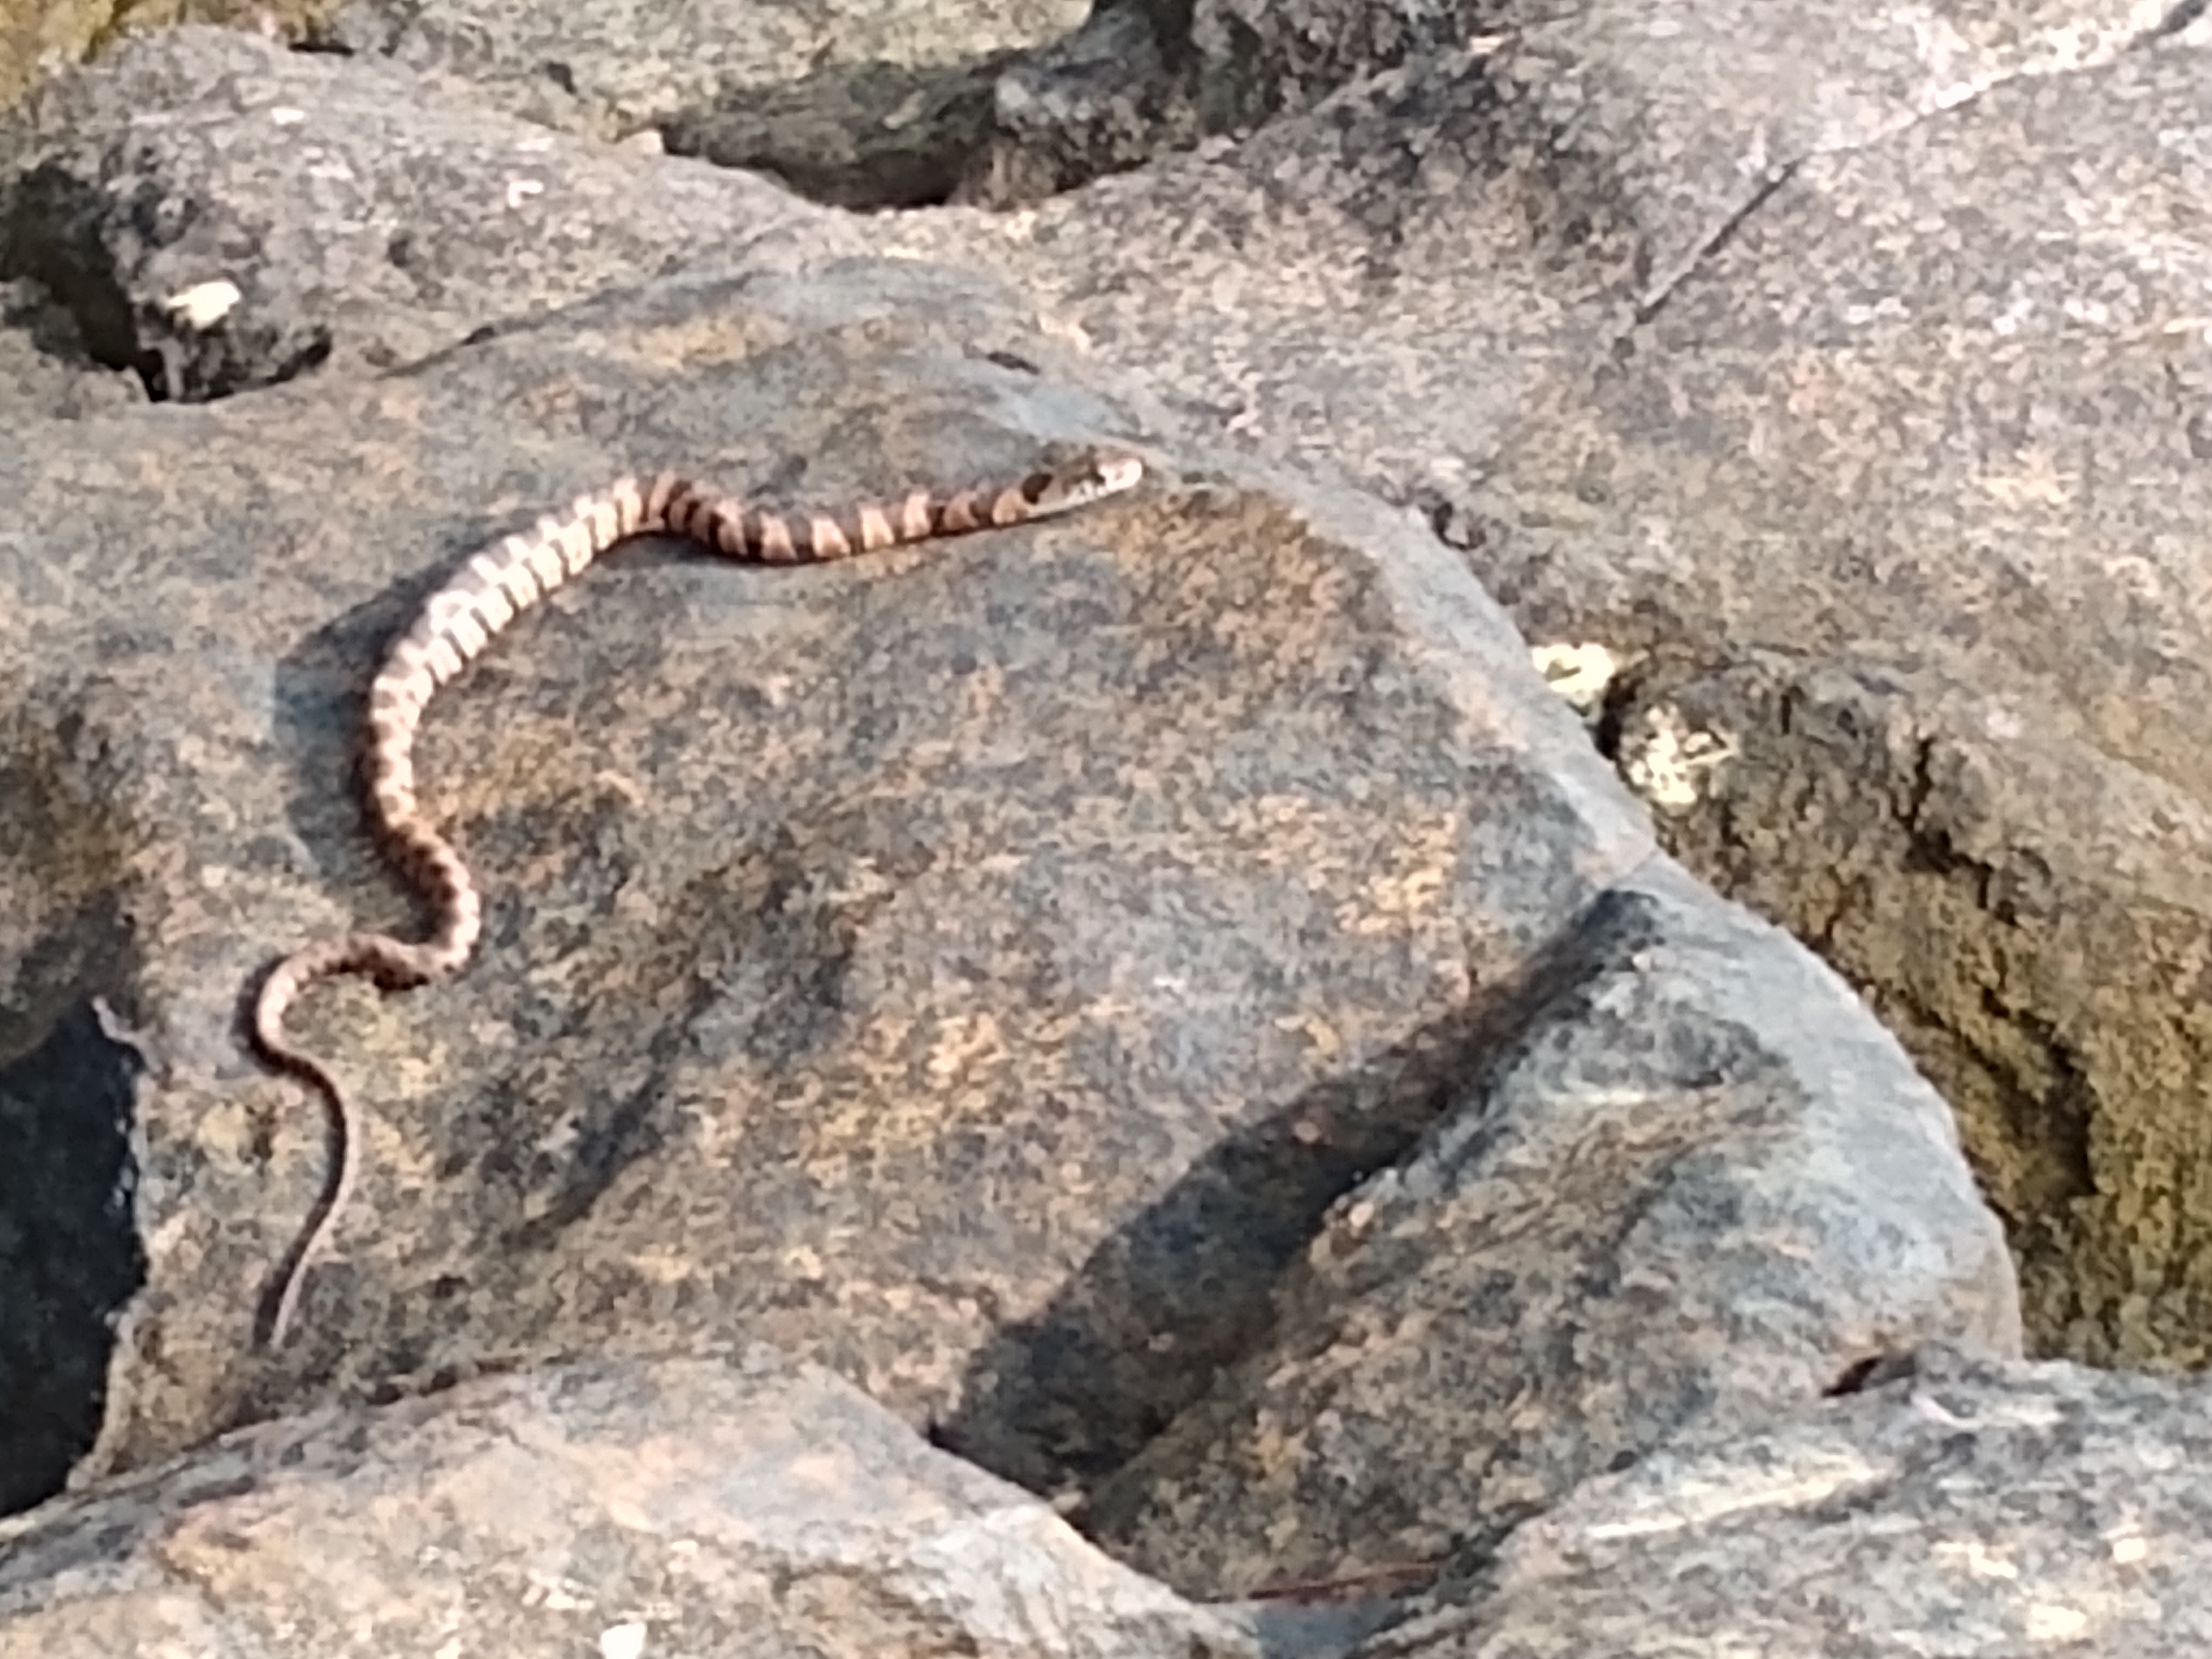 A baby copperhead sunning itself on a rock by the river.